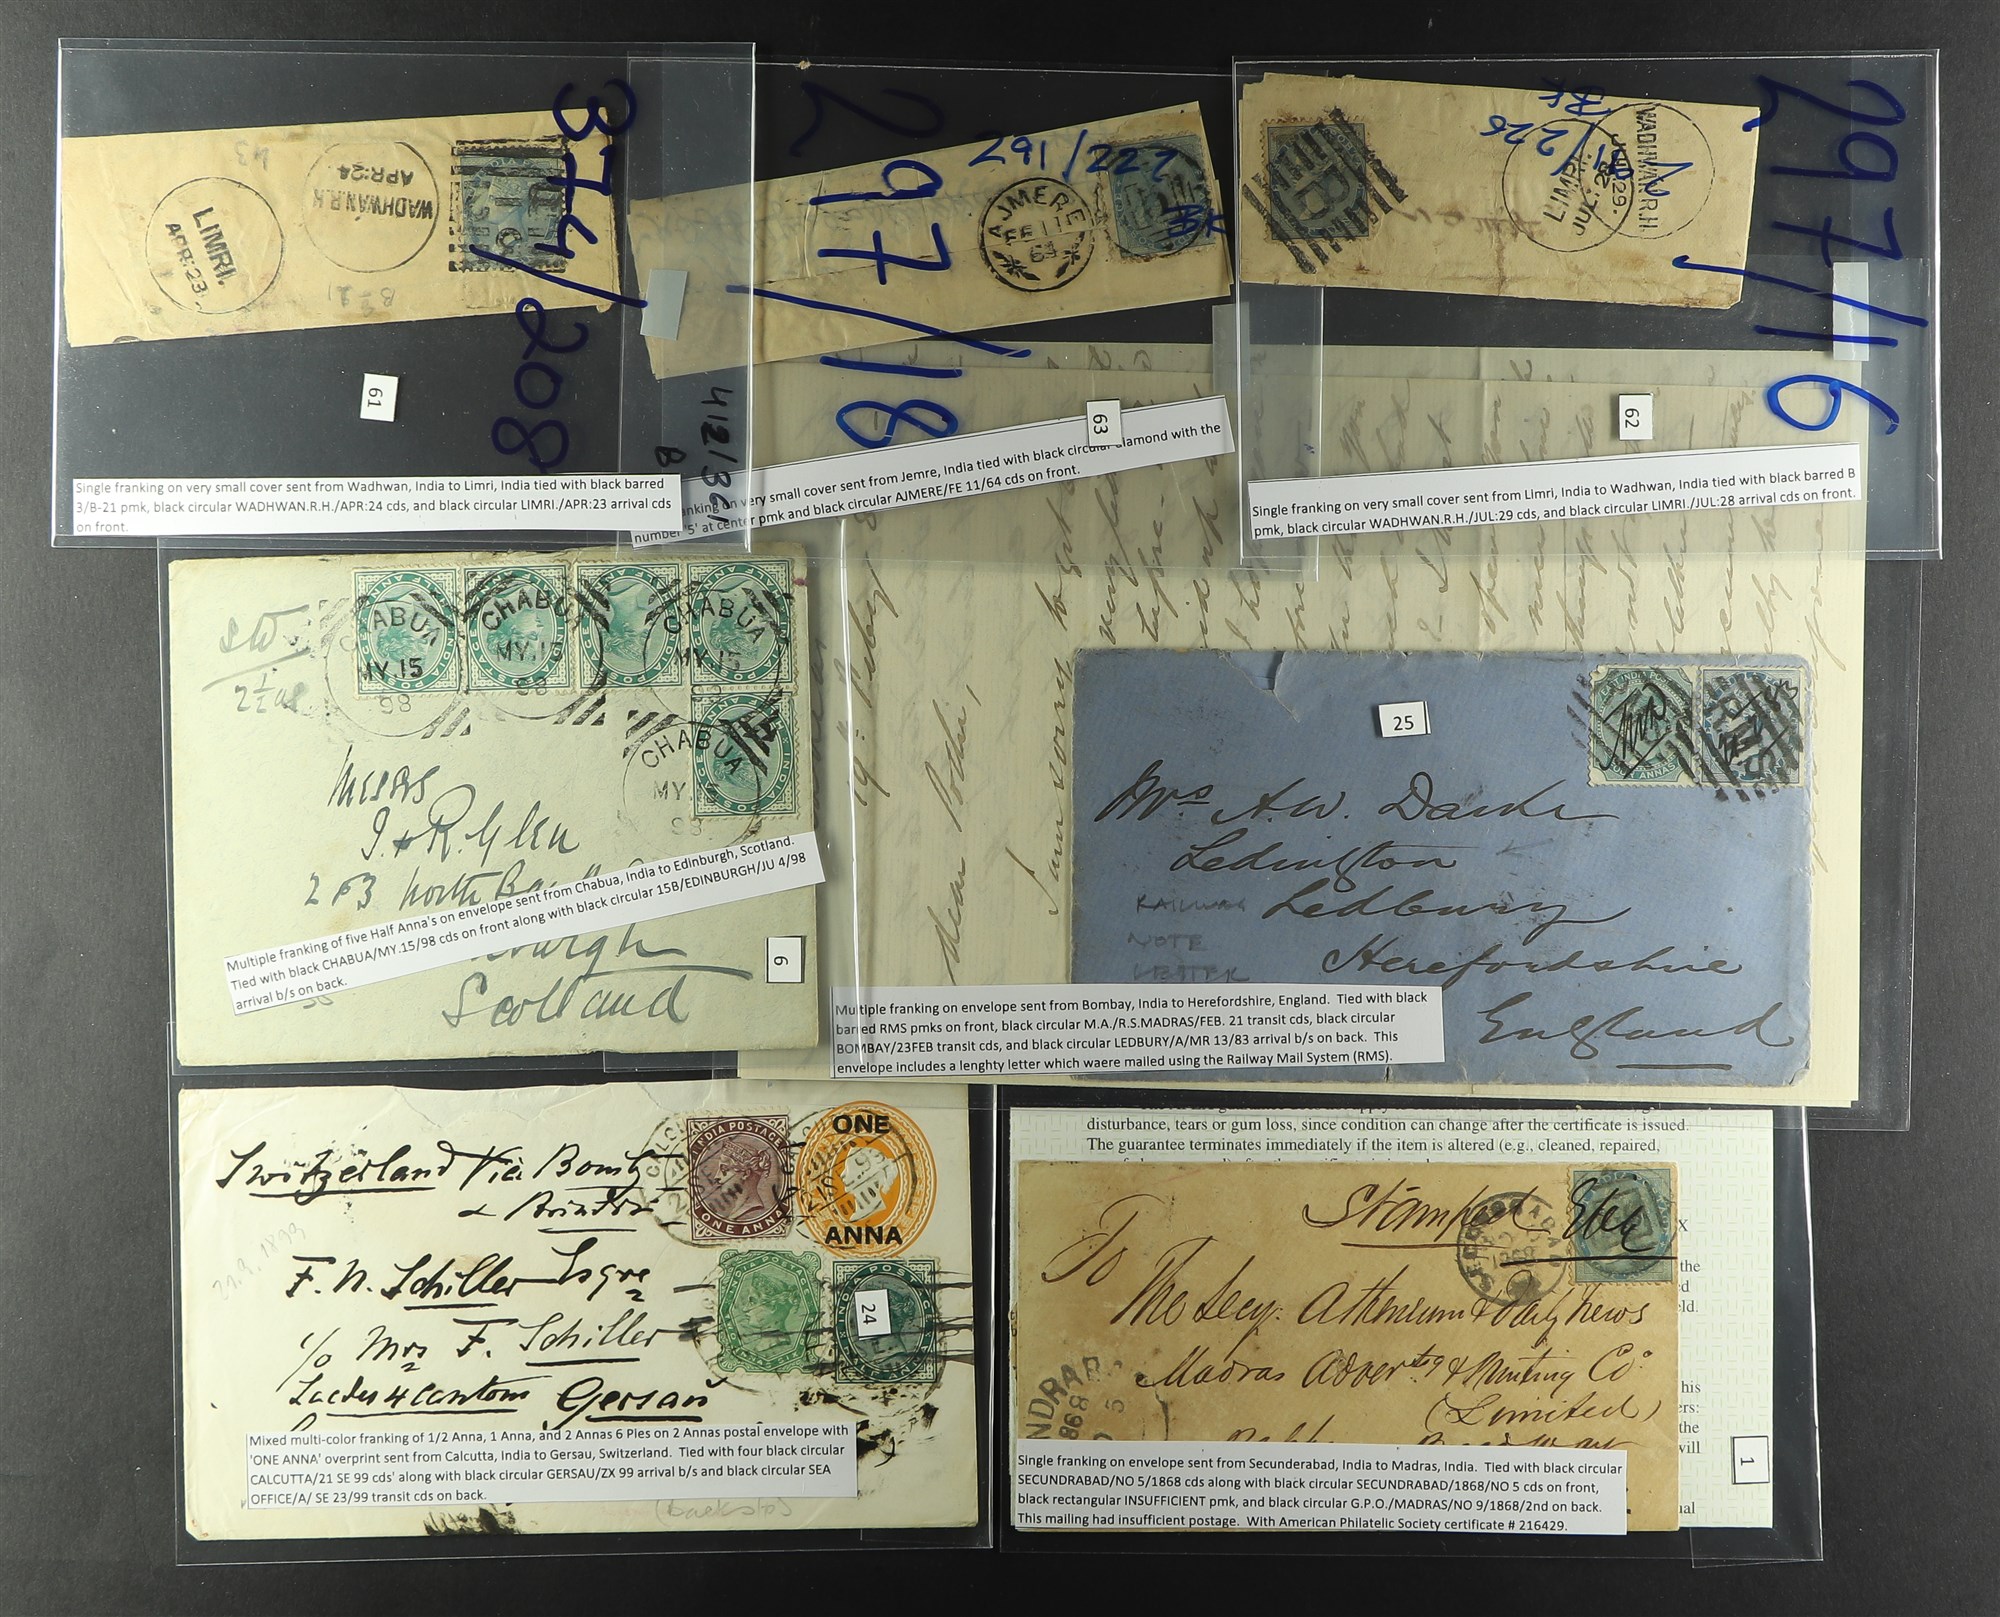 INDIA 1864 - 1899 COVERS GROUP. 11 covers in sleeves all bearing British India stamp frankings, each